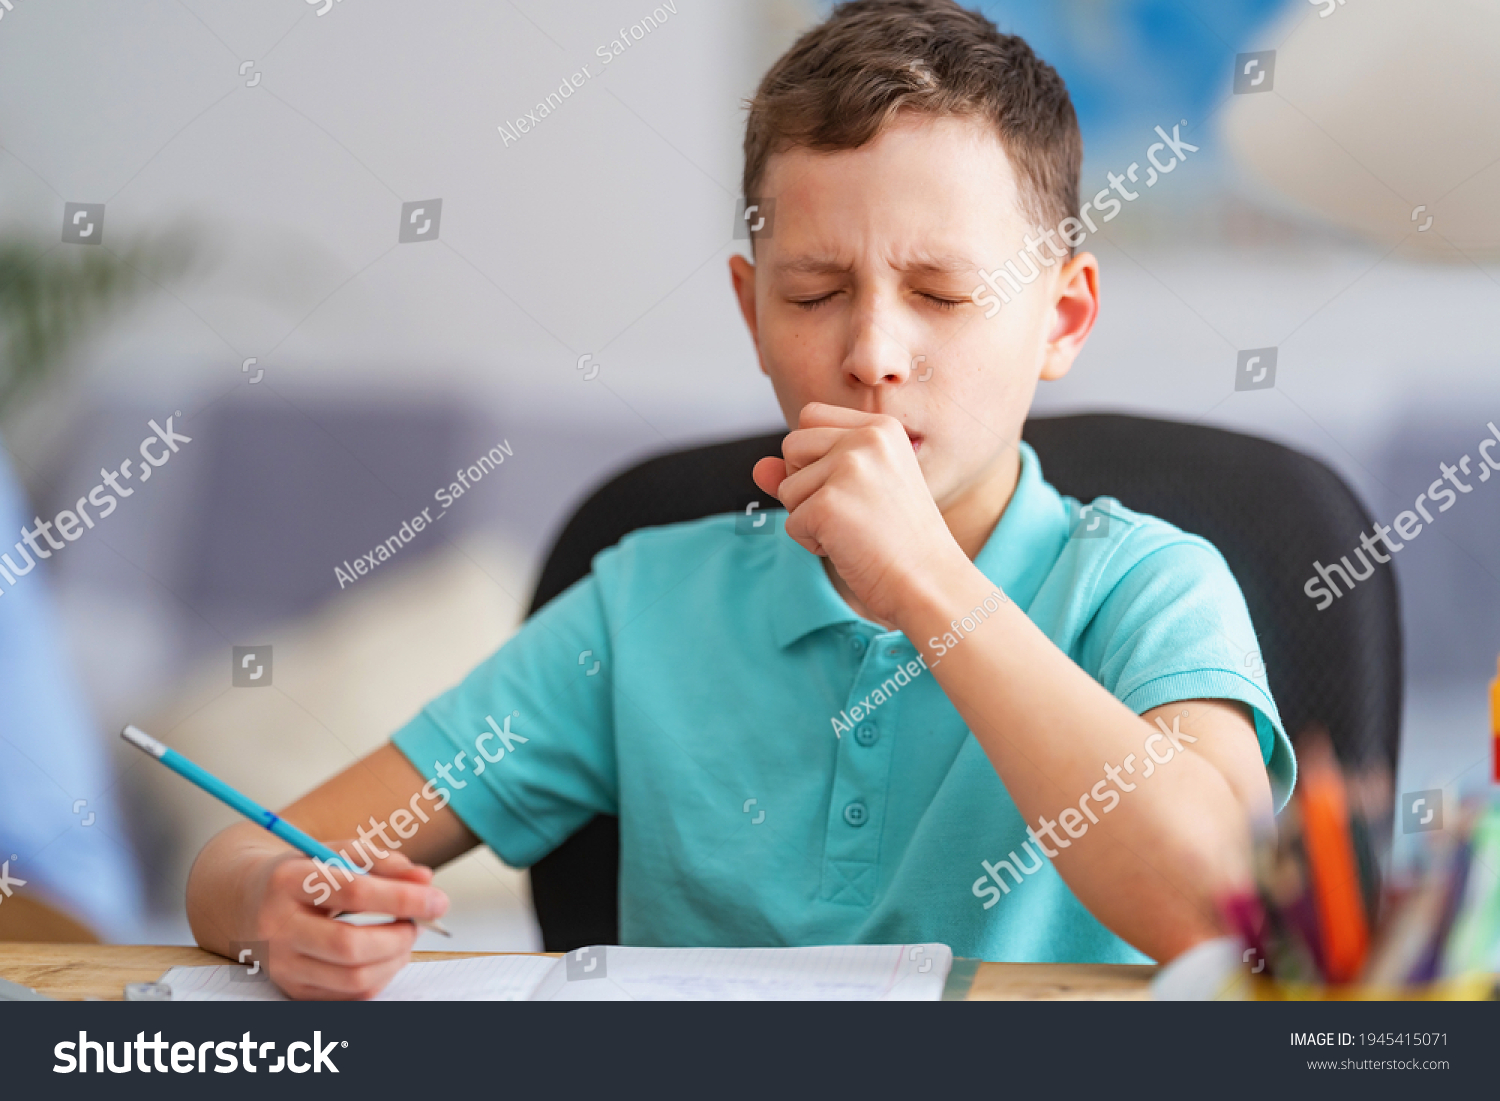 small child, schoolboy of 8 years old, is studying at a desk with laptop, at home. School distance education at home during quarantine concept. Coughing, sneezing, covering your mouth with your hand. #1945415071